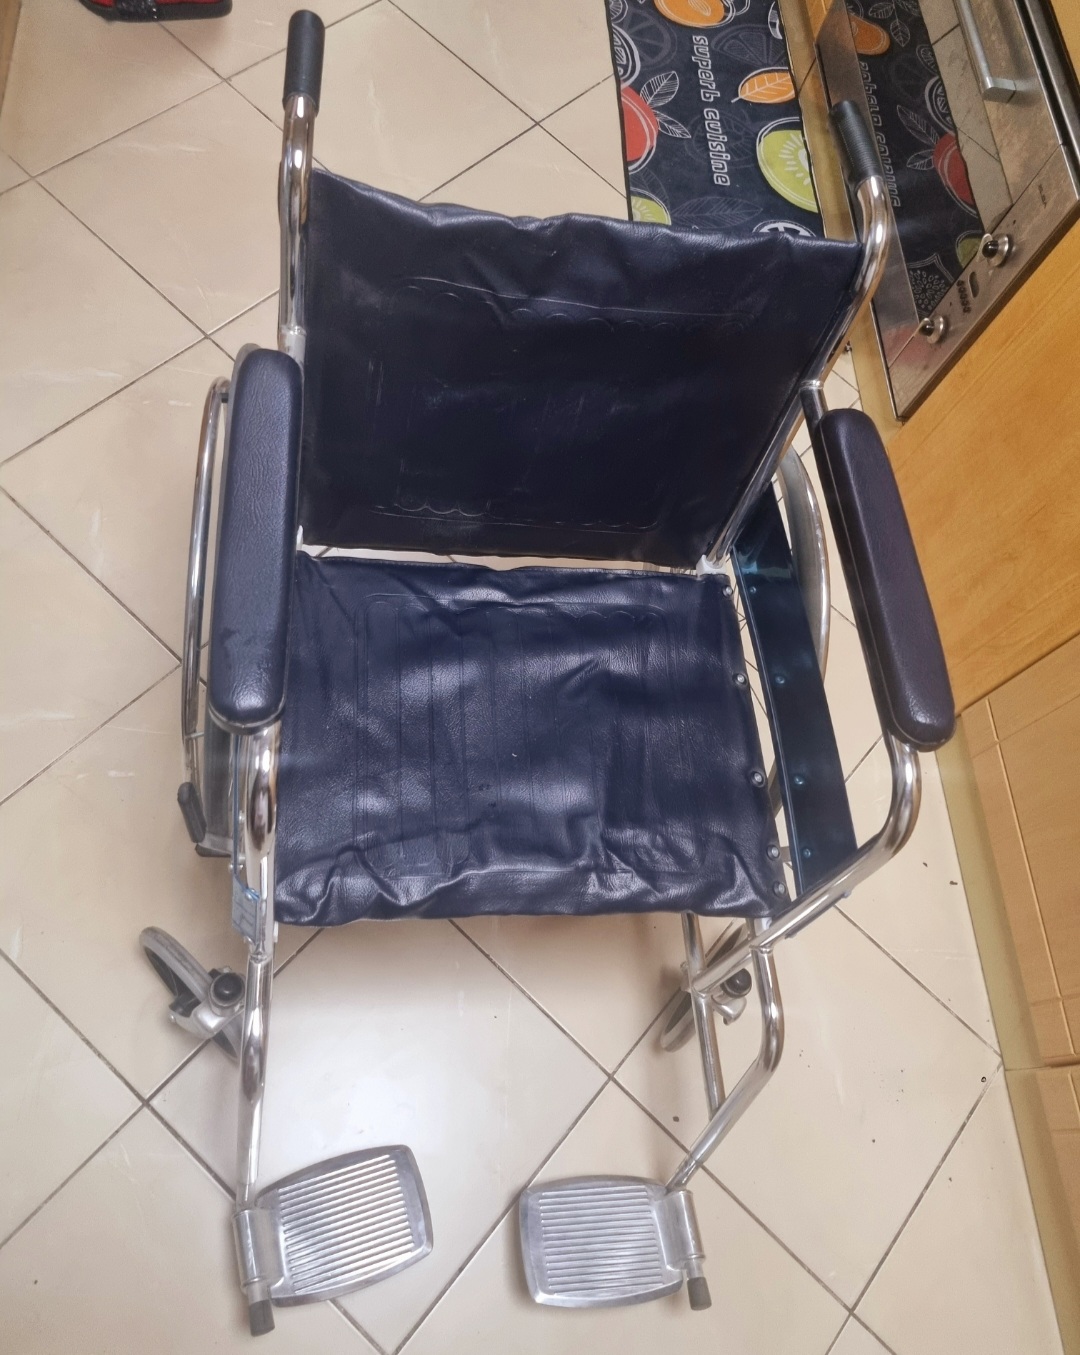 Wheel chair in perfect condition usage less than month